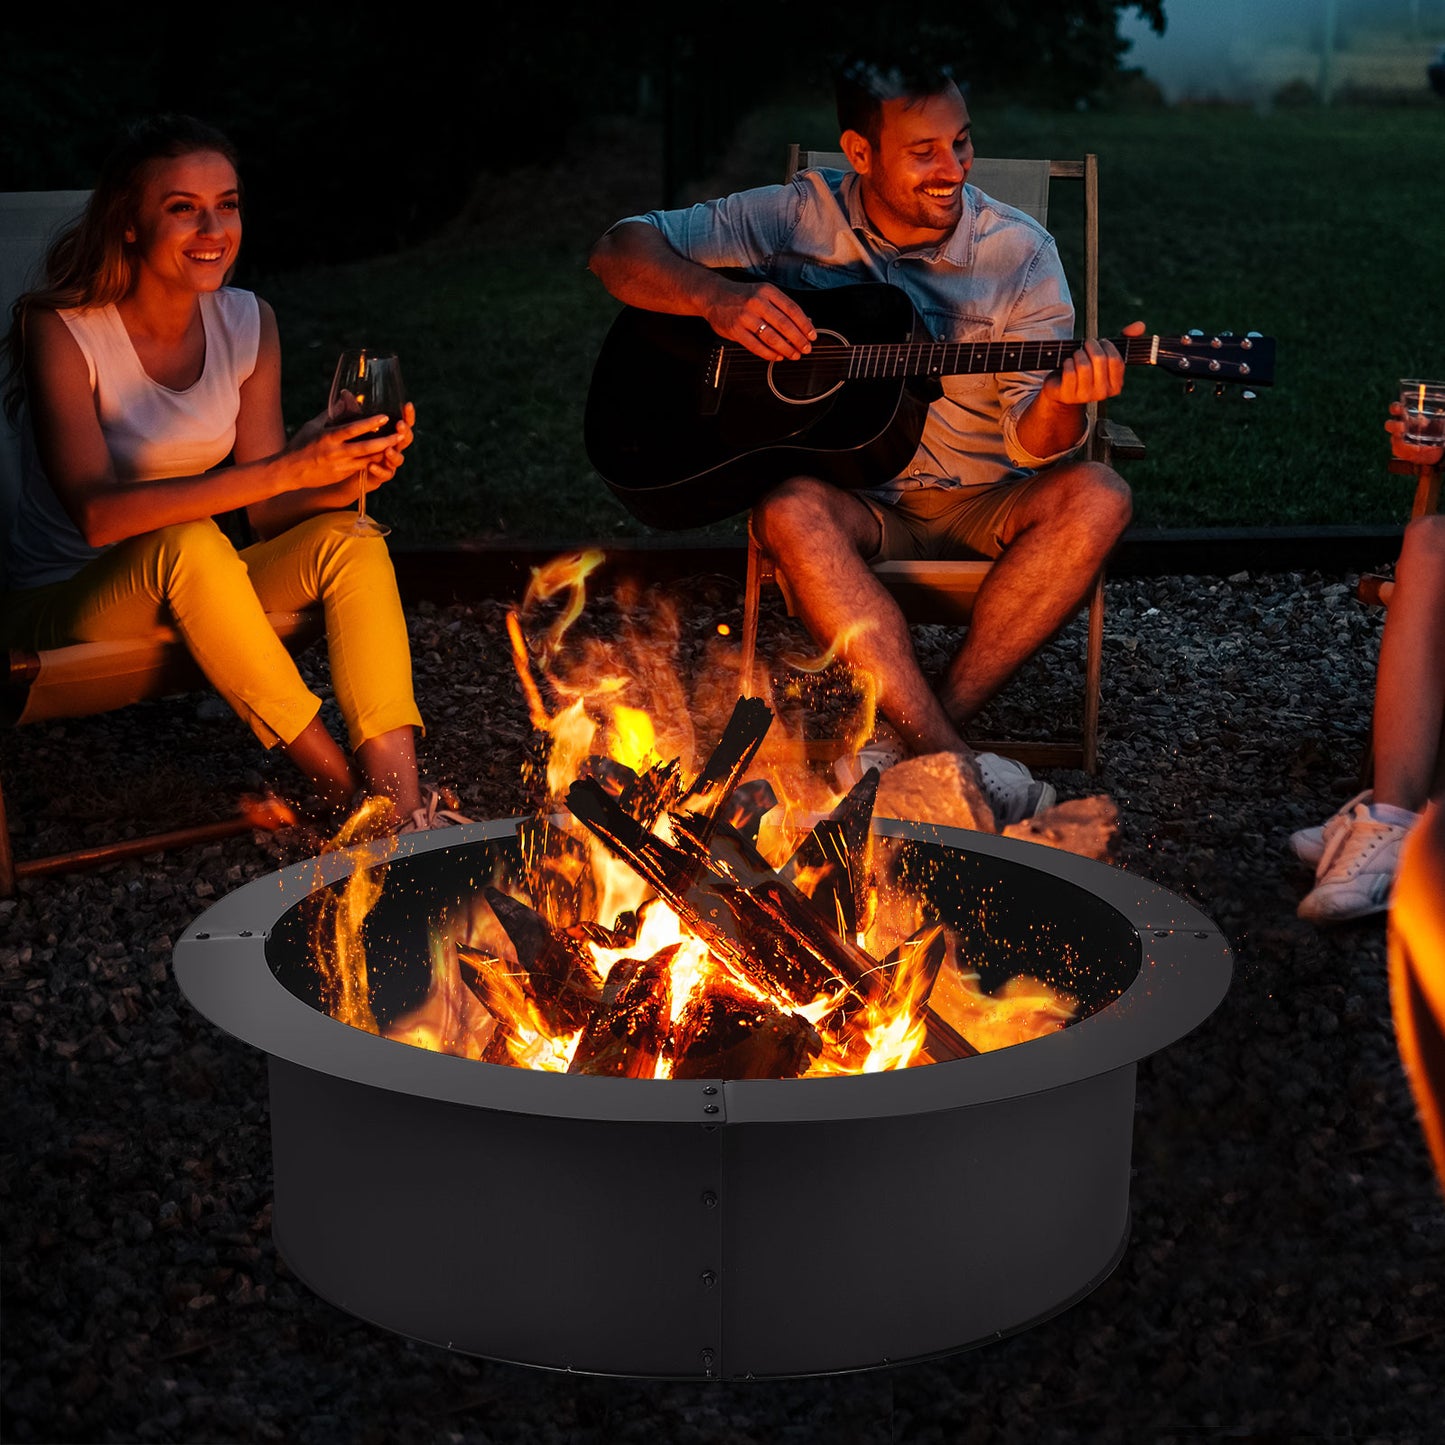 36 inch Round Steel Fire Pit Ring Line for Outdoor Backyard